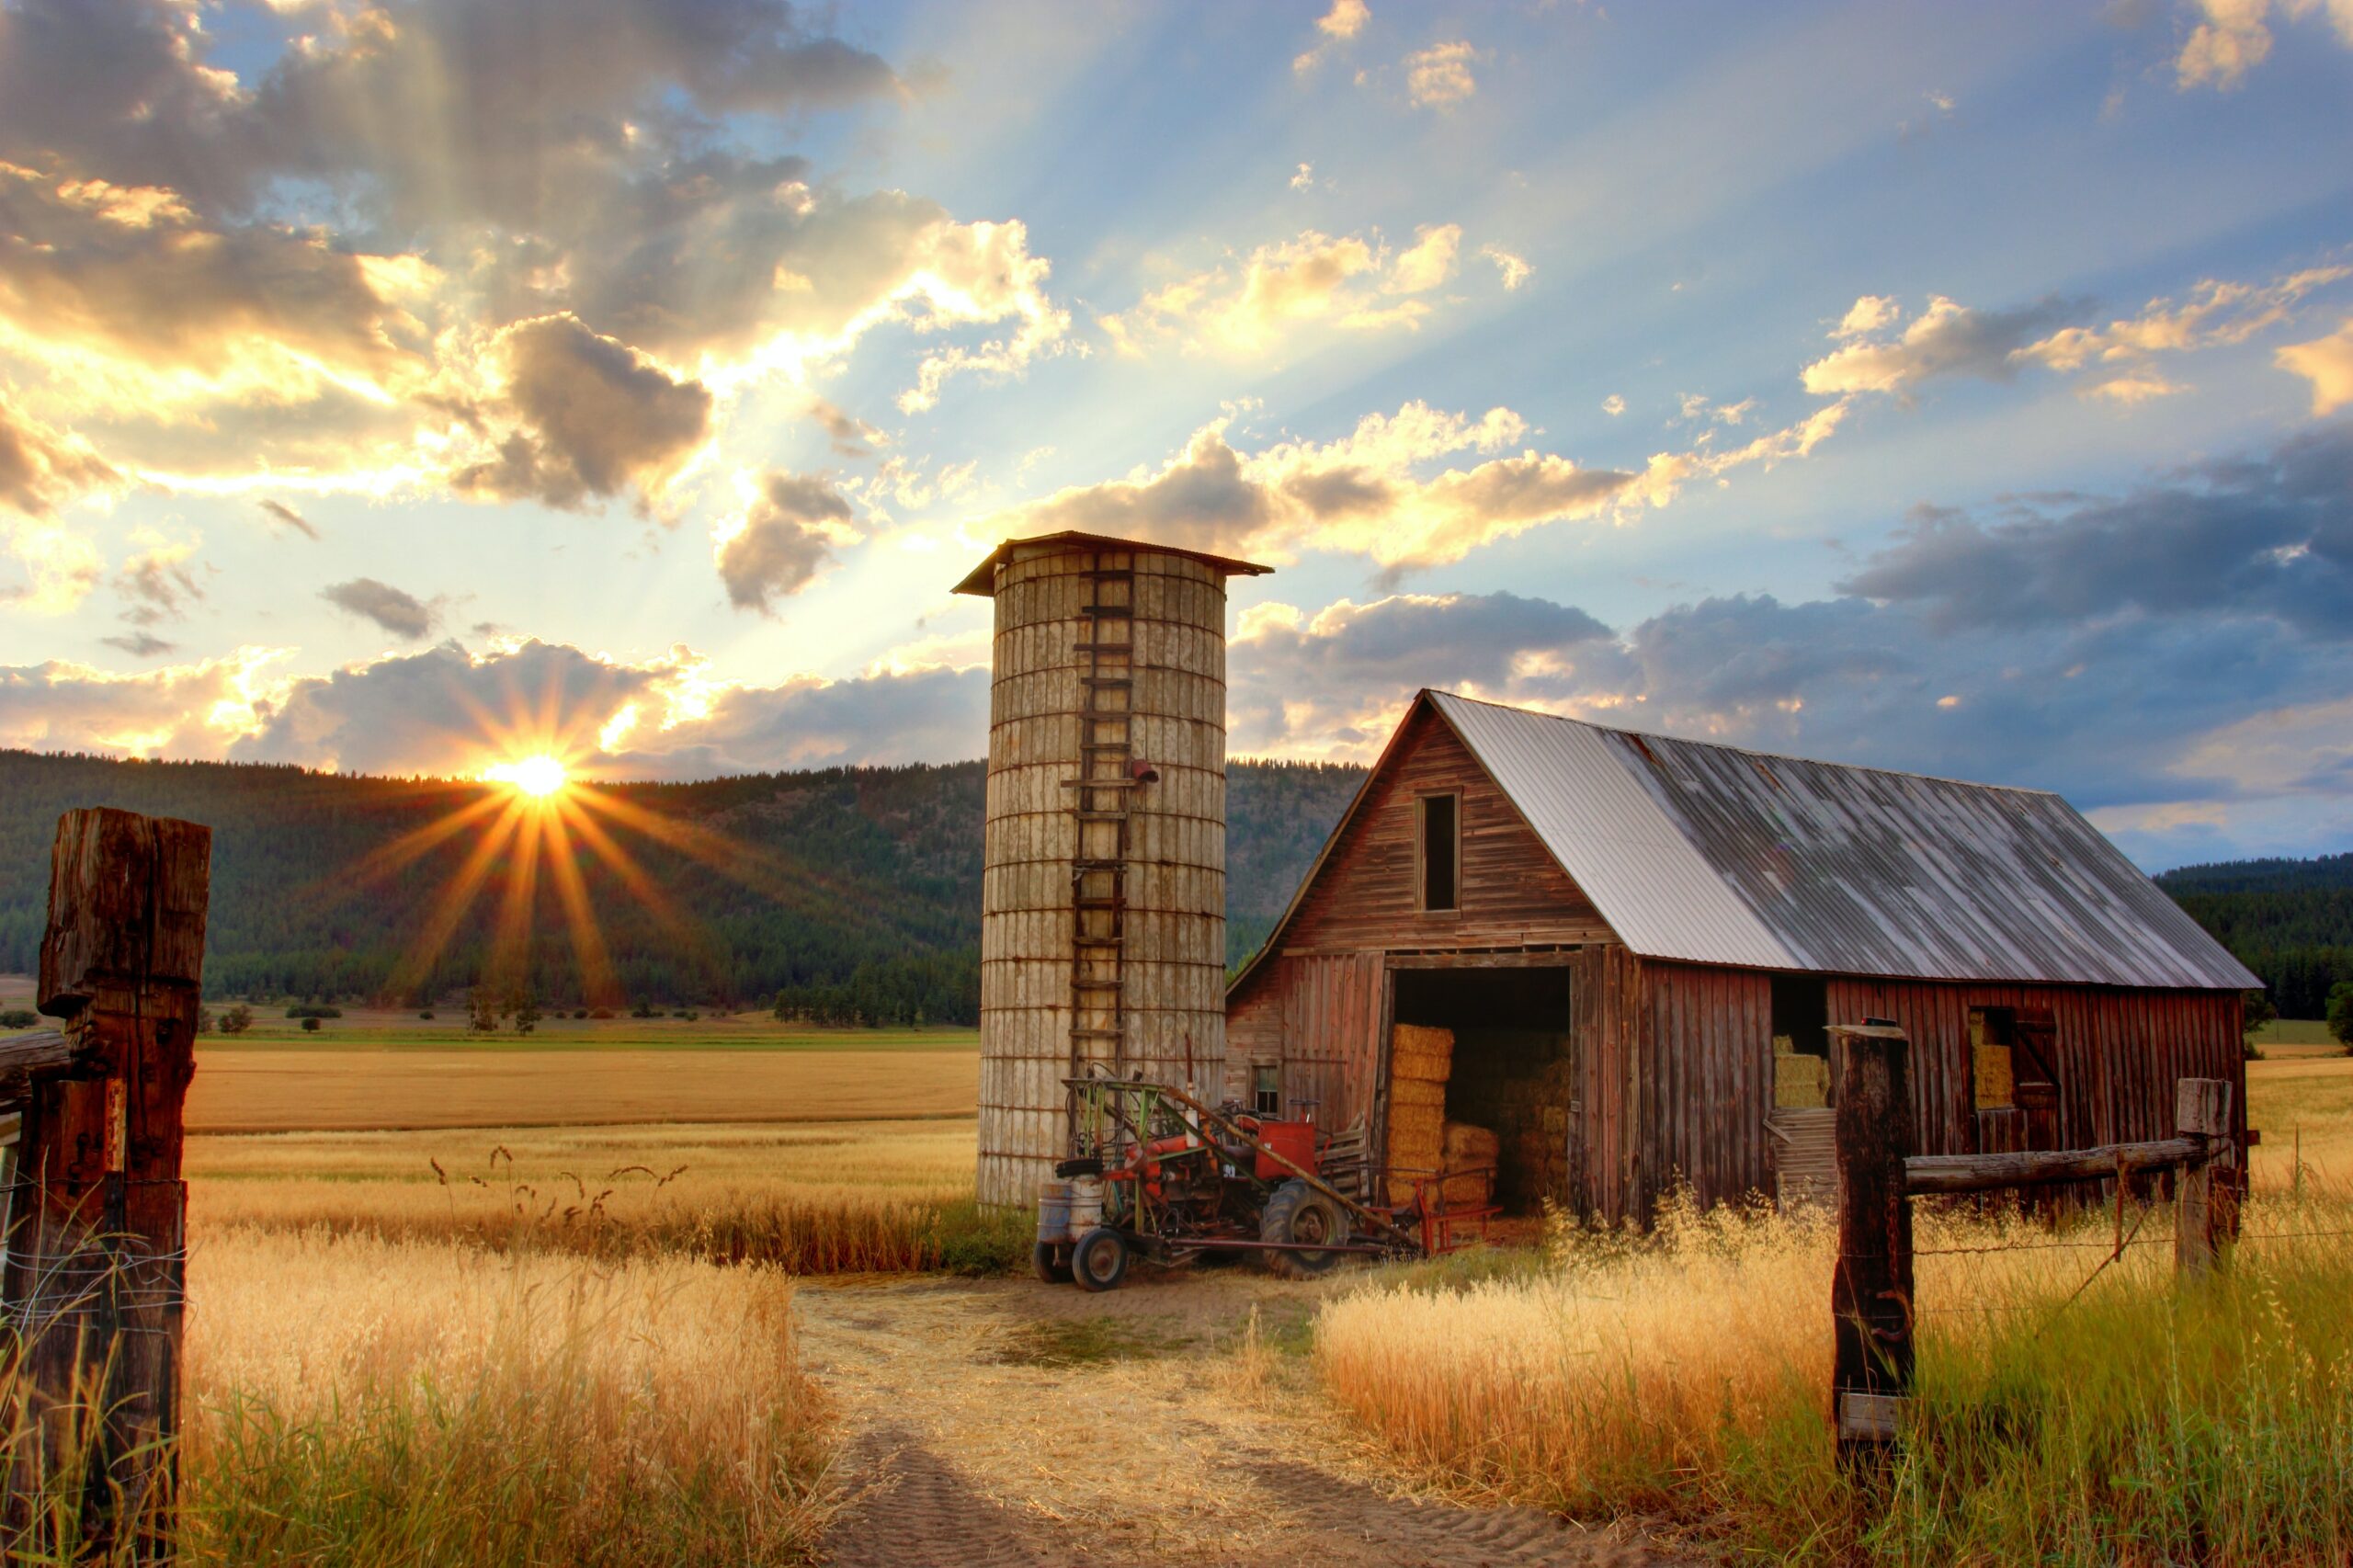 A picture of a red barn next to a tall grain silo surrounded by fields of wheat. The sun shines brightly as it begins to set in the horizon.